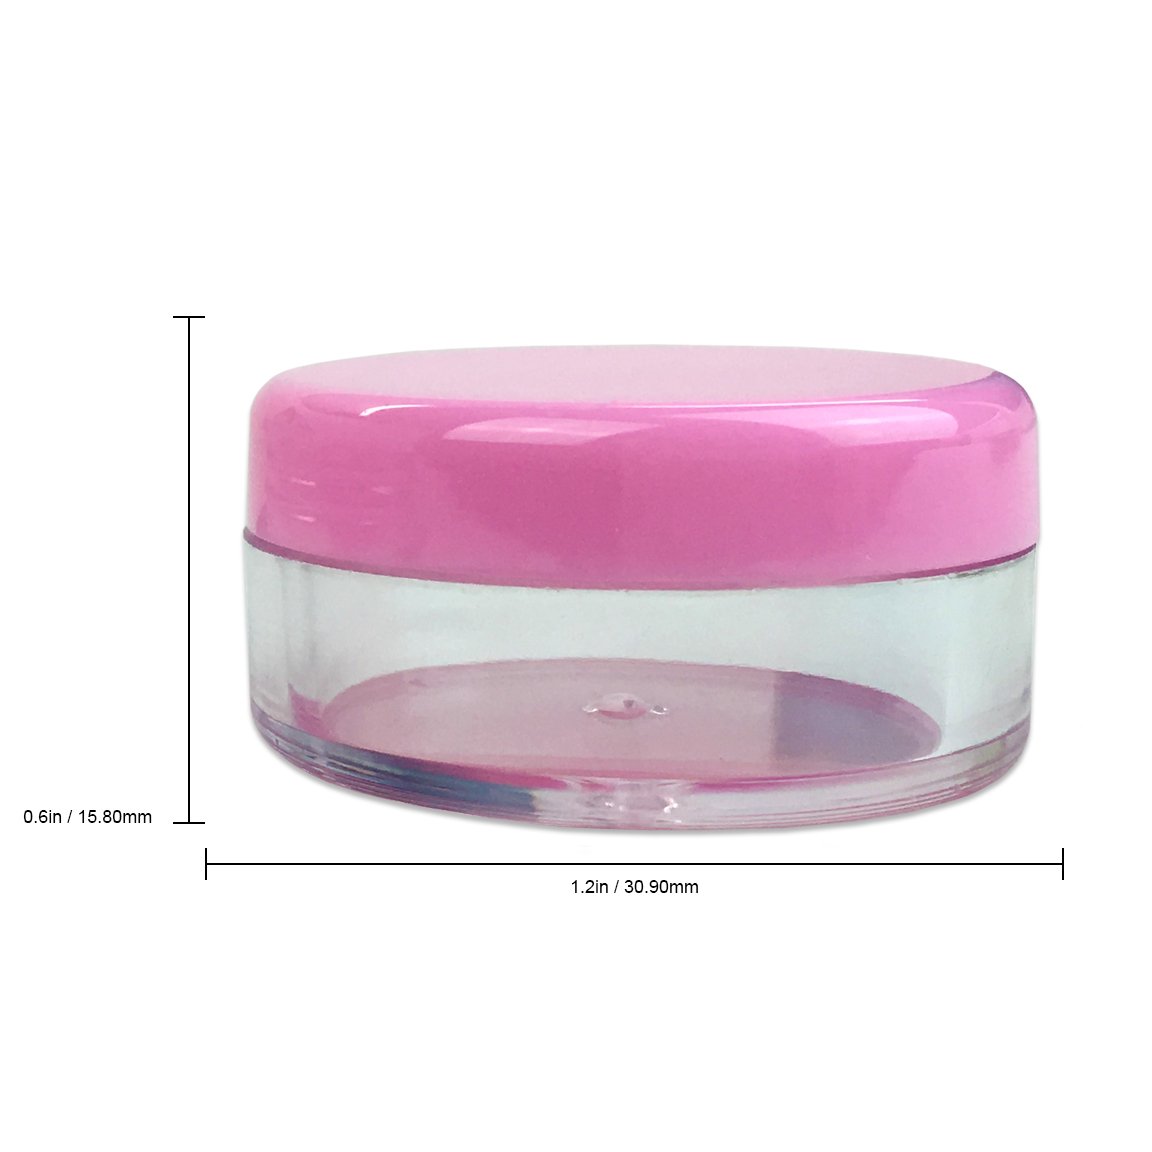 Beauticom 5G/5ML Clear Plastic Cosmetic Container Jars with PINK Lids, 50 Pcs